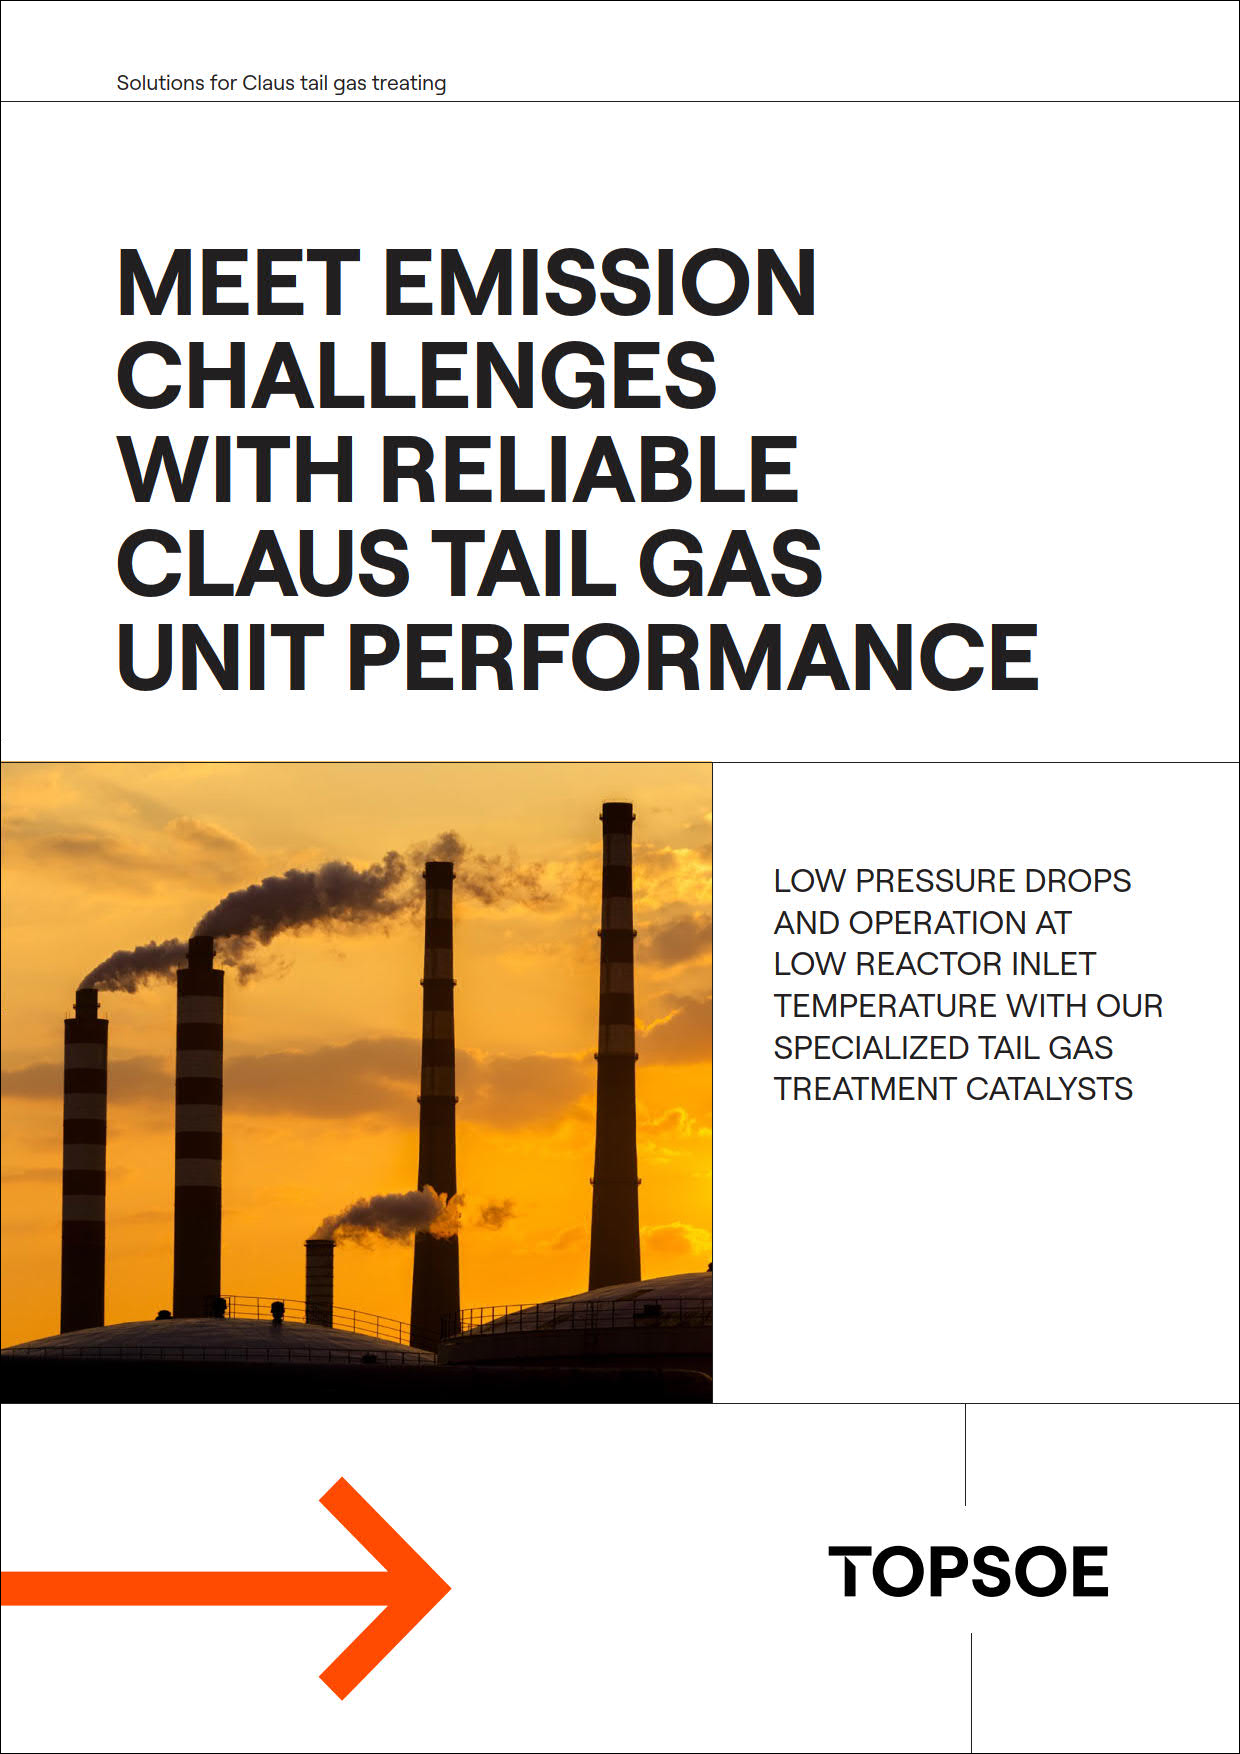 Meet emission challenges with reliable Claus tail gas unit performance